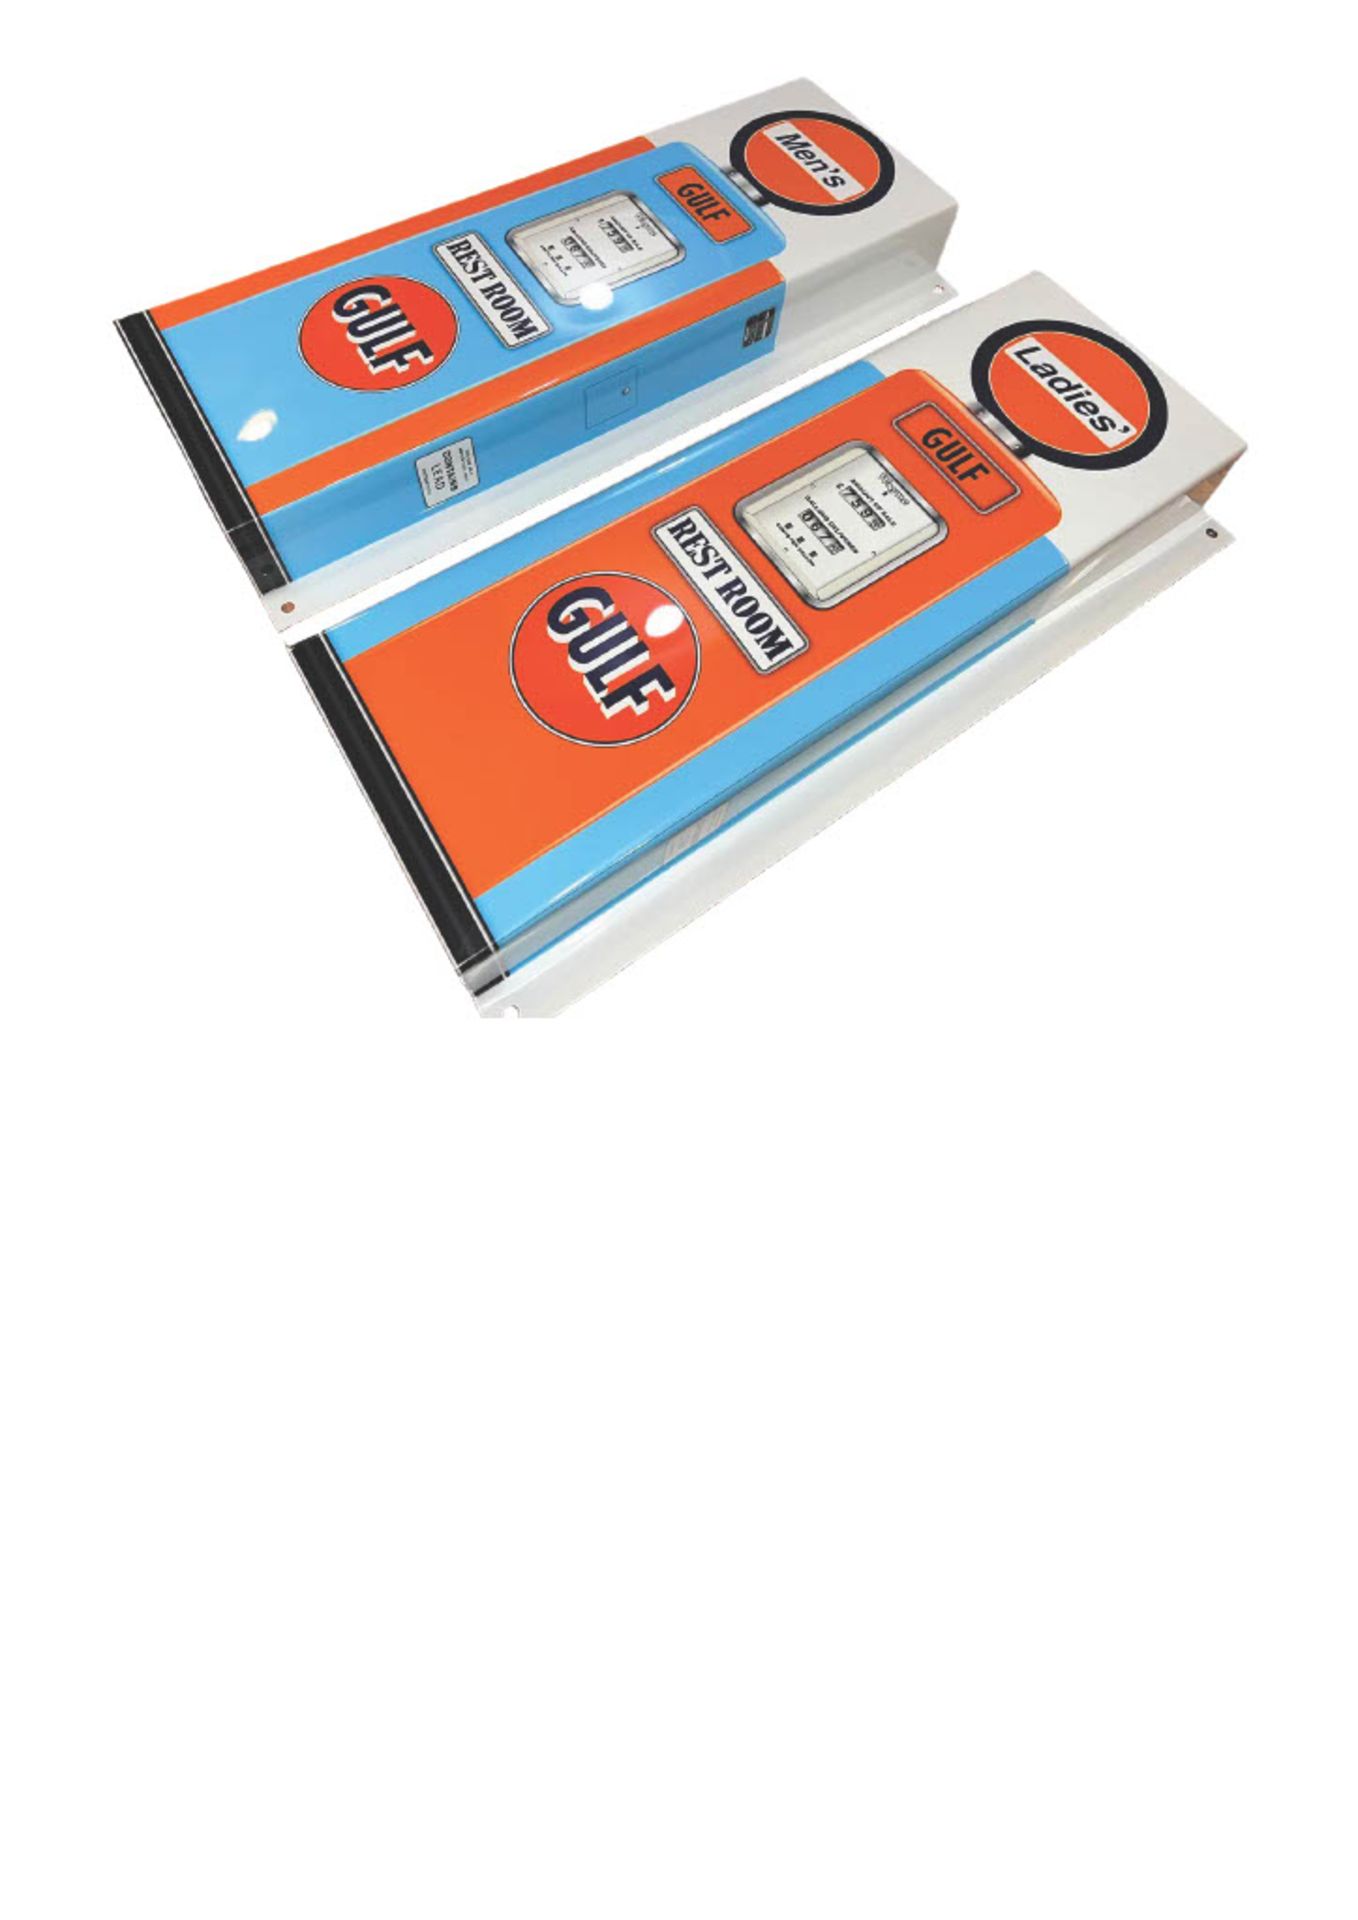 Pair of Gulf Oil Gas Pumps Aluminum Garage Display - Image 2 of 4